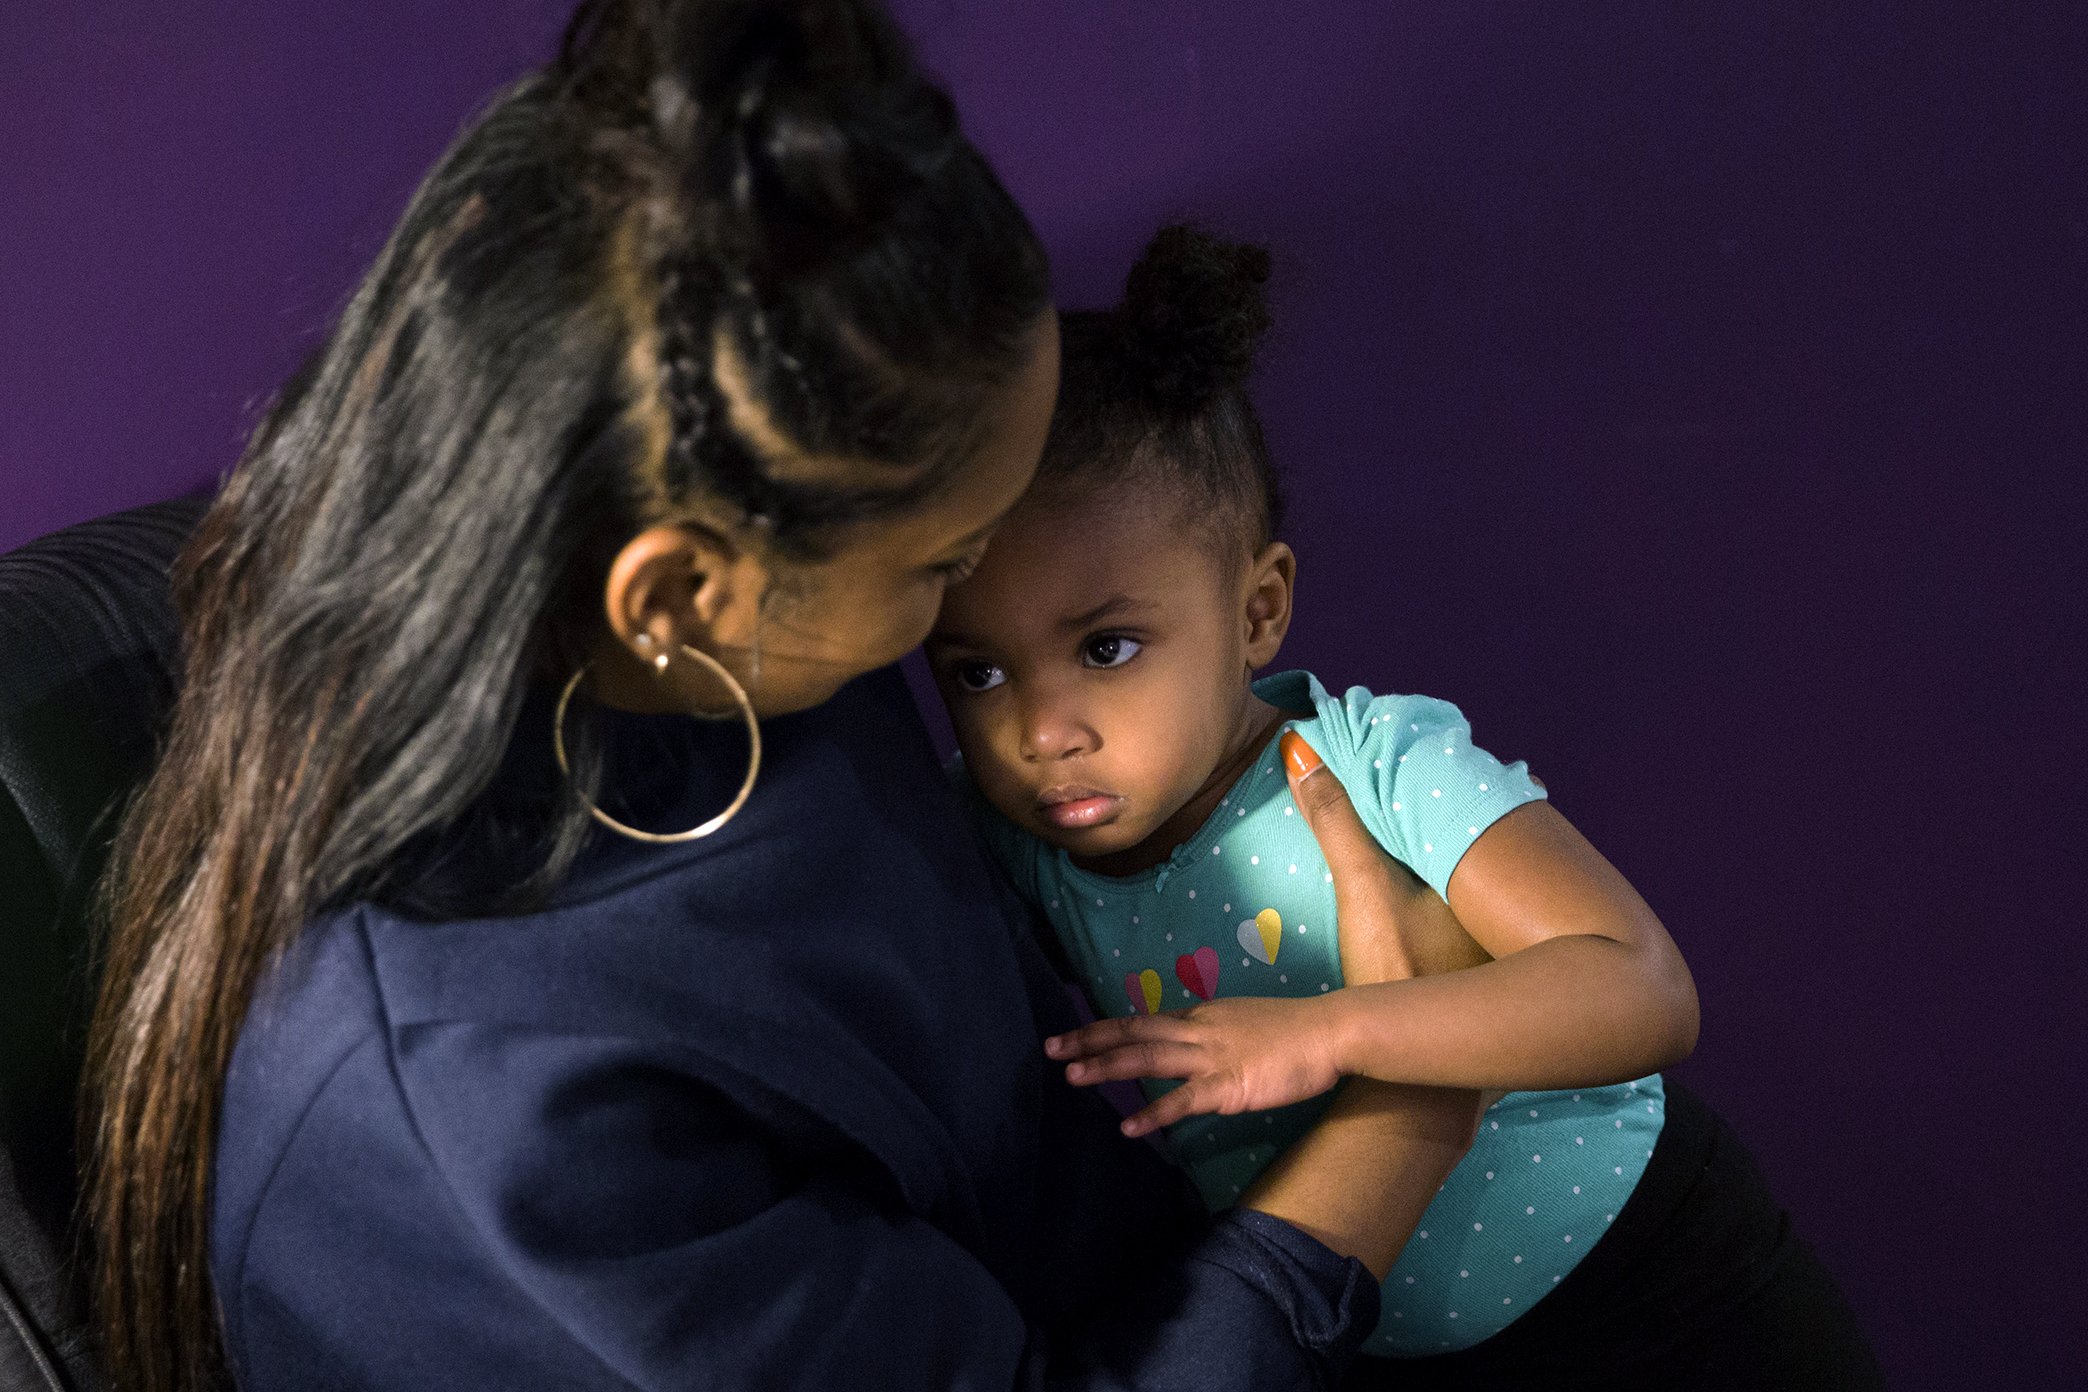  Midwife Asasiya Muhammad (left) hugs two year old Annalulu Ndanu in her office at Inner Circle Midwifery on February 9, 2019. Muhammad delivered Ndanu two years ago and is now affectionately referred to as "Auntie Asasiya" by Ndanu and her siblings.